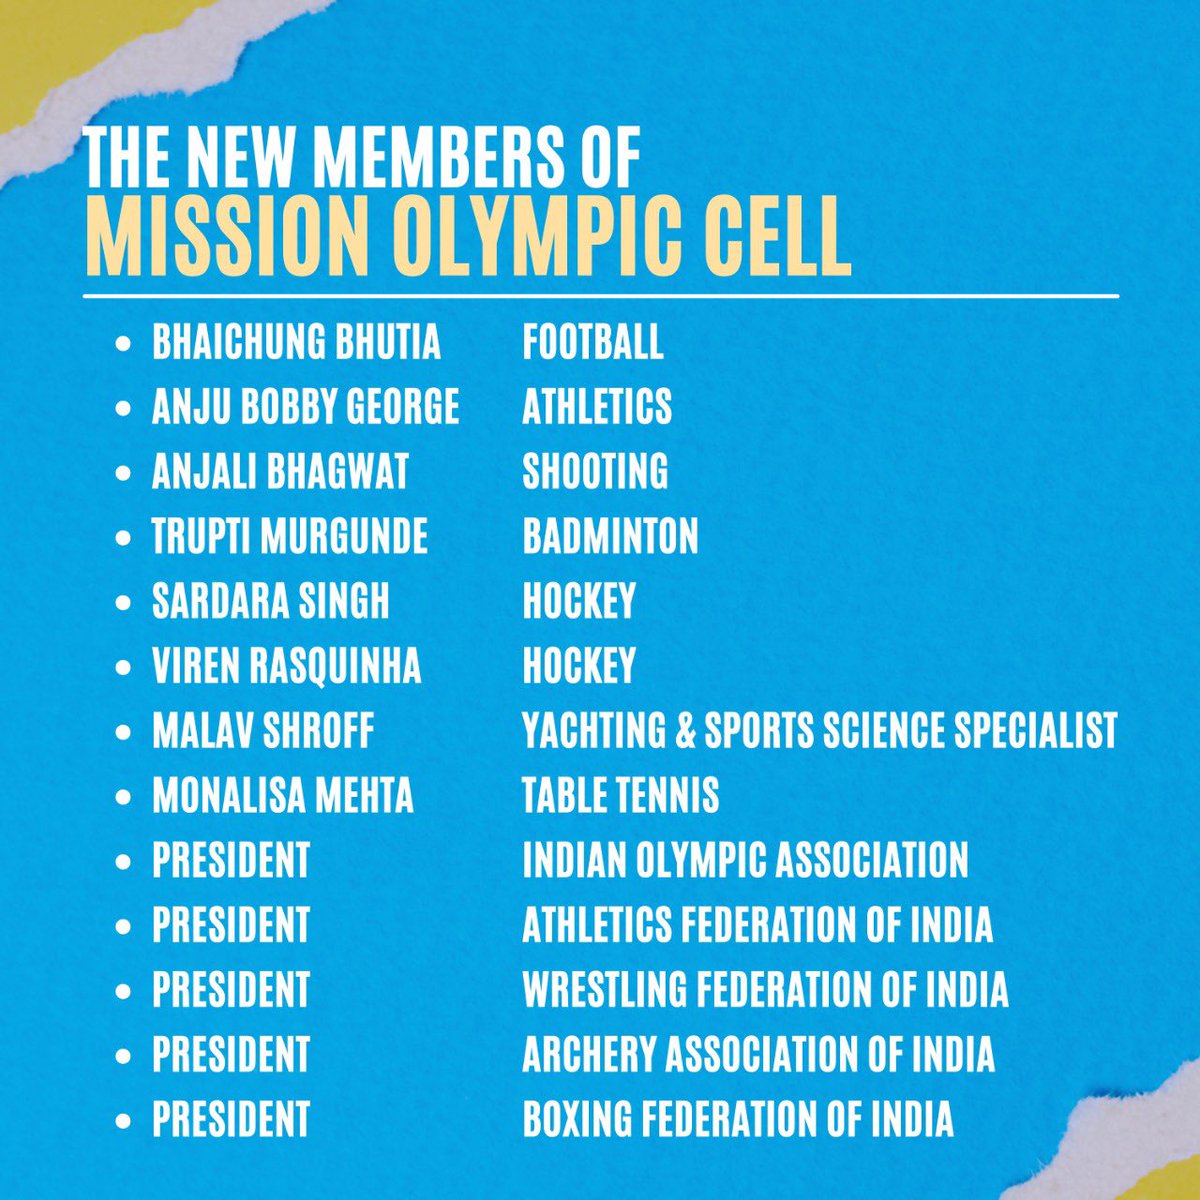 The complete list of Non Official Members of the Mission Olympic Cell is as follows: Preparations for the 2024 Olympics are underway and the rich experience of the former athletes on the MOC will strongly benefit our sportspersons.